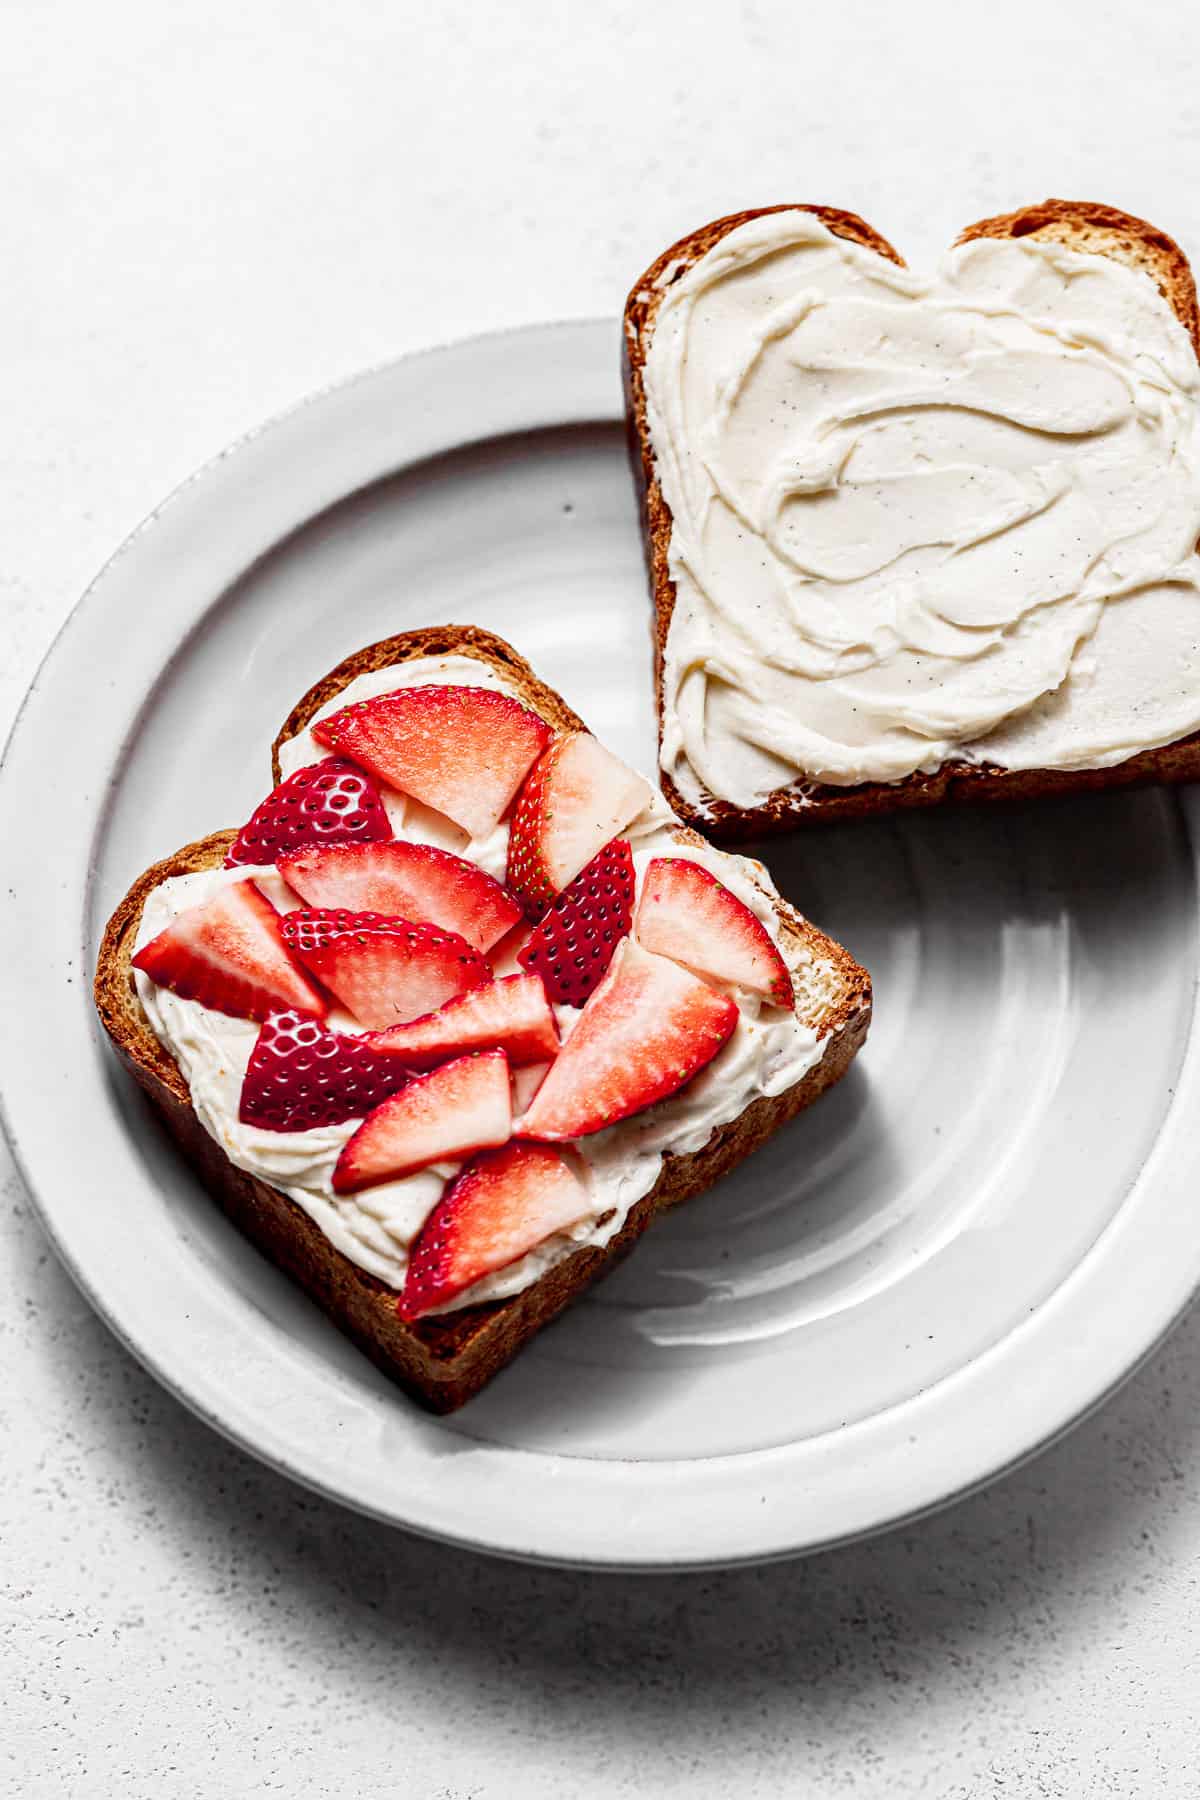 brioche bread slices covered with cream cheese filling and topped with strawberries on white plate.